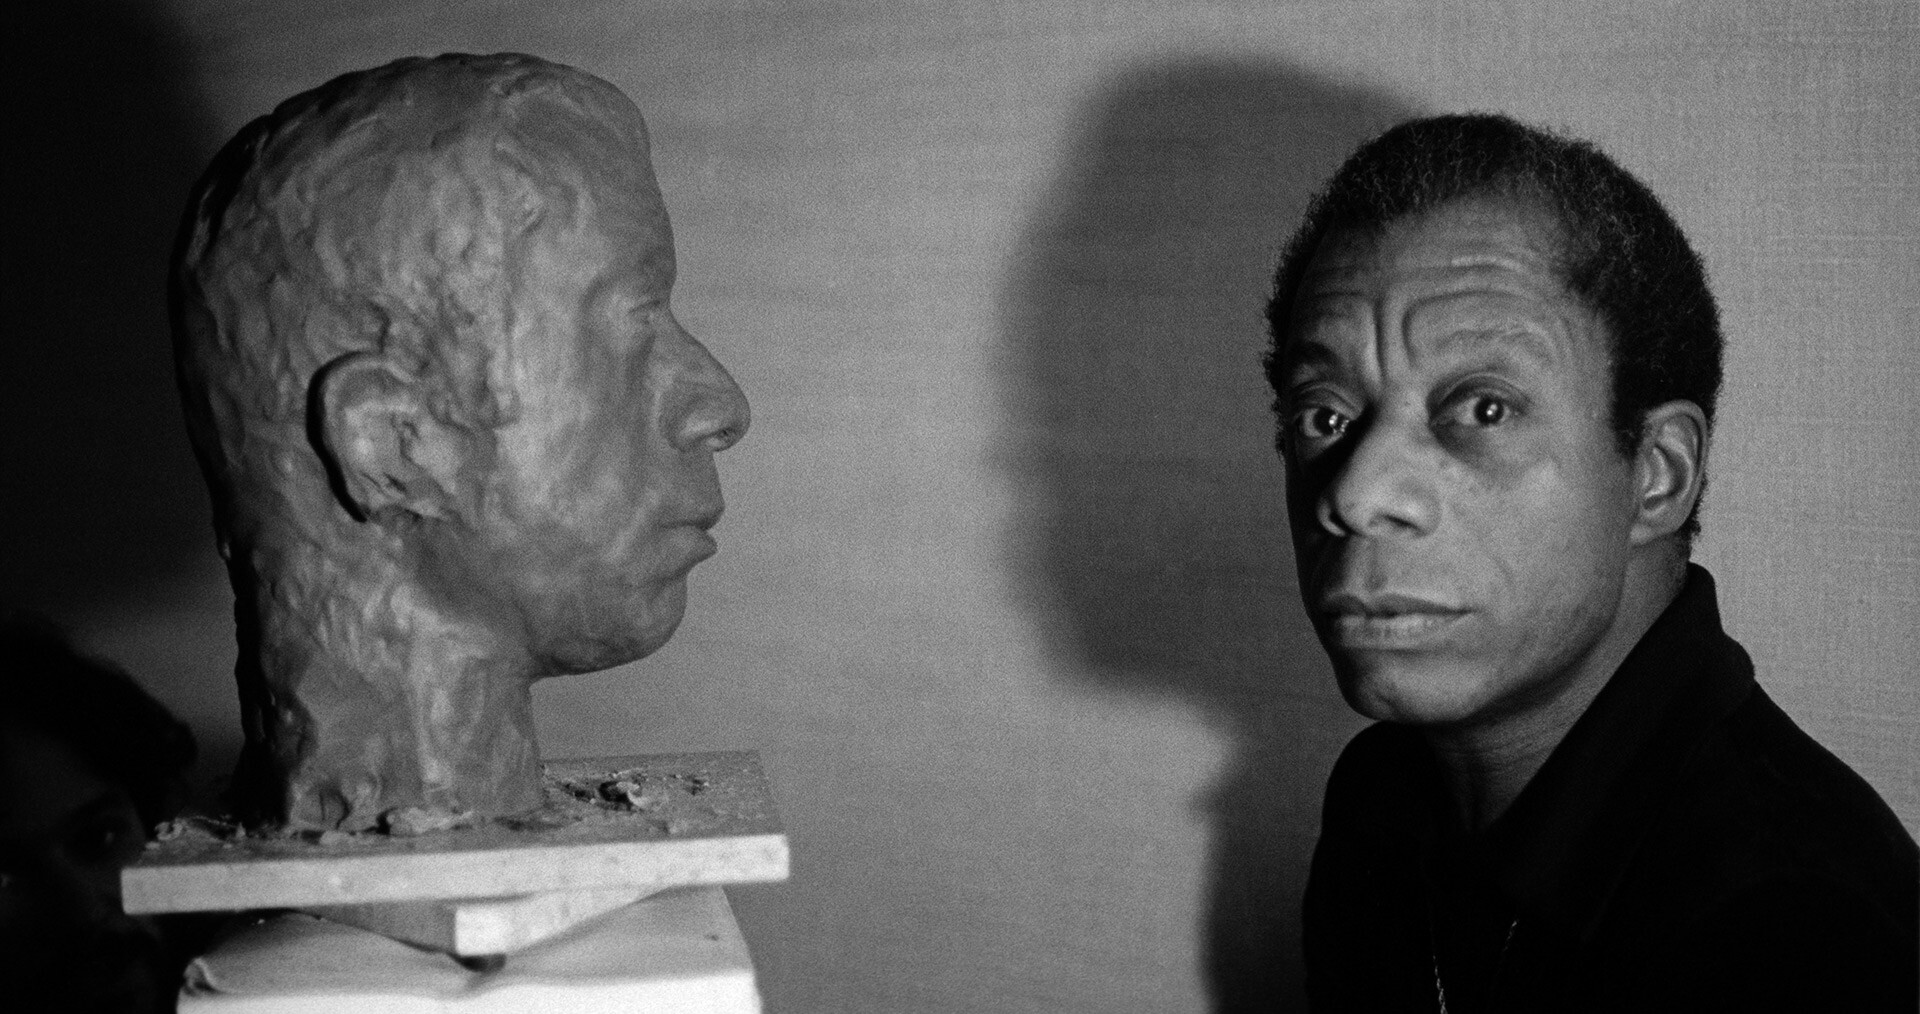 A photo by Jane Evelyn Atwood	, titled James Baldwin with bust of himself sculpted by Larry Wolhandler, Paris, France, dated 1975.